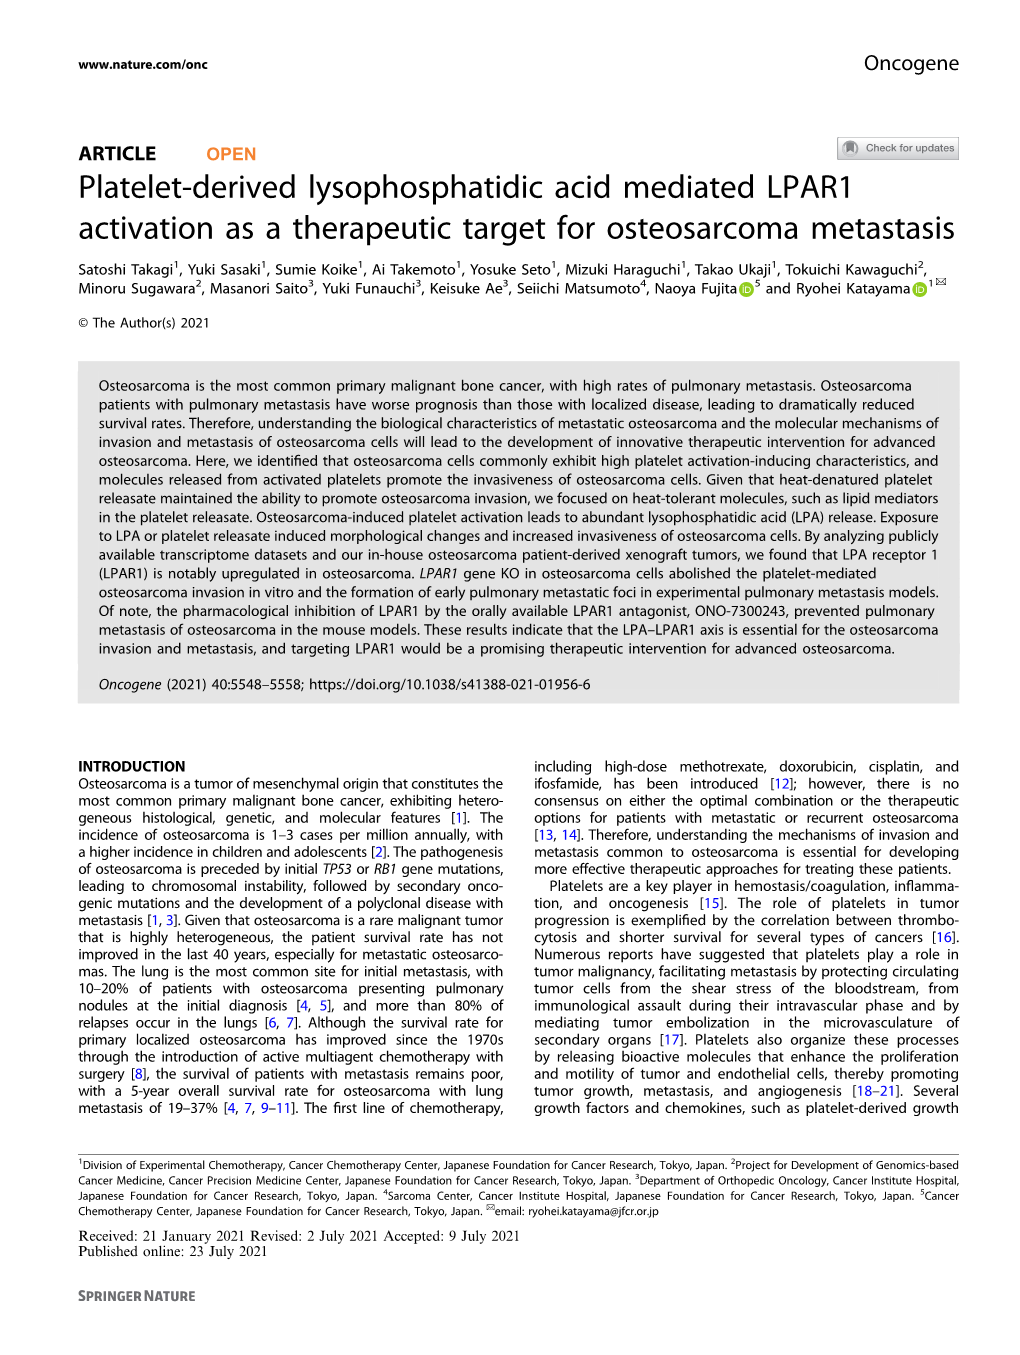 Platelet-Derived Lysophosphatidic Acid Mediated LPAR1 Activation As a Therapeutic Target for Osteosarcoma Metastasis